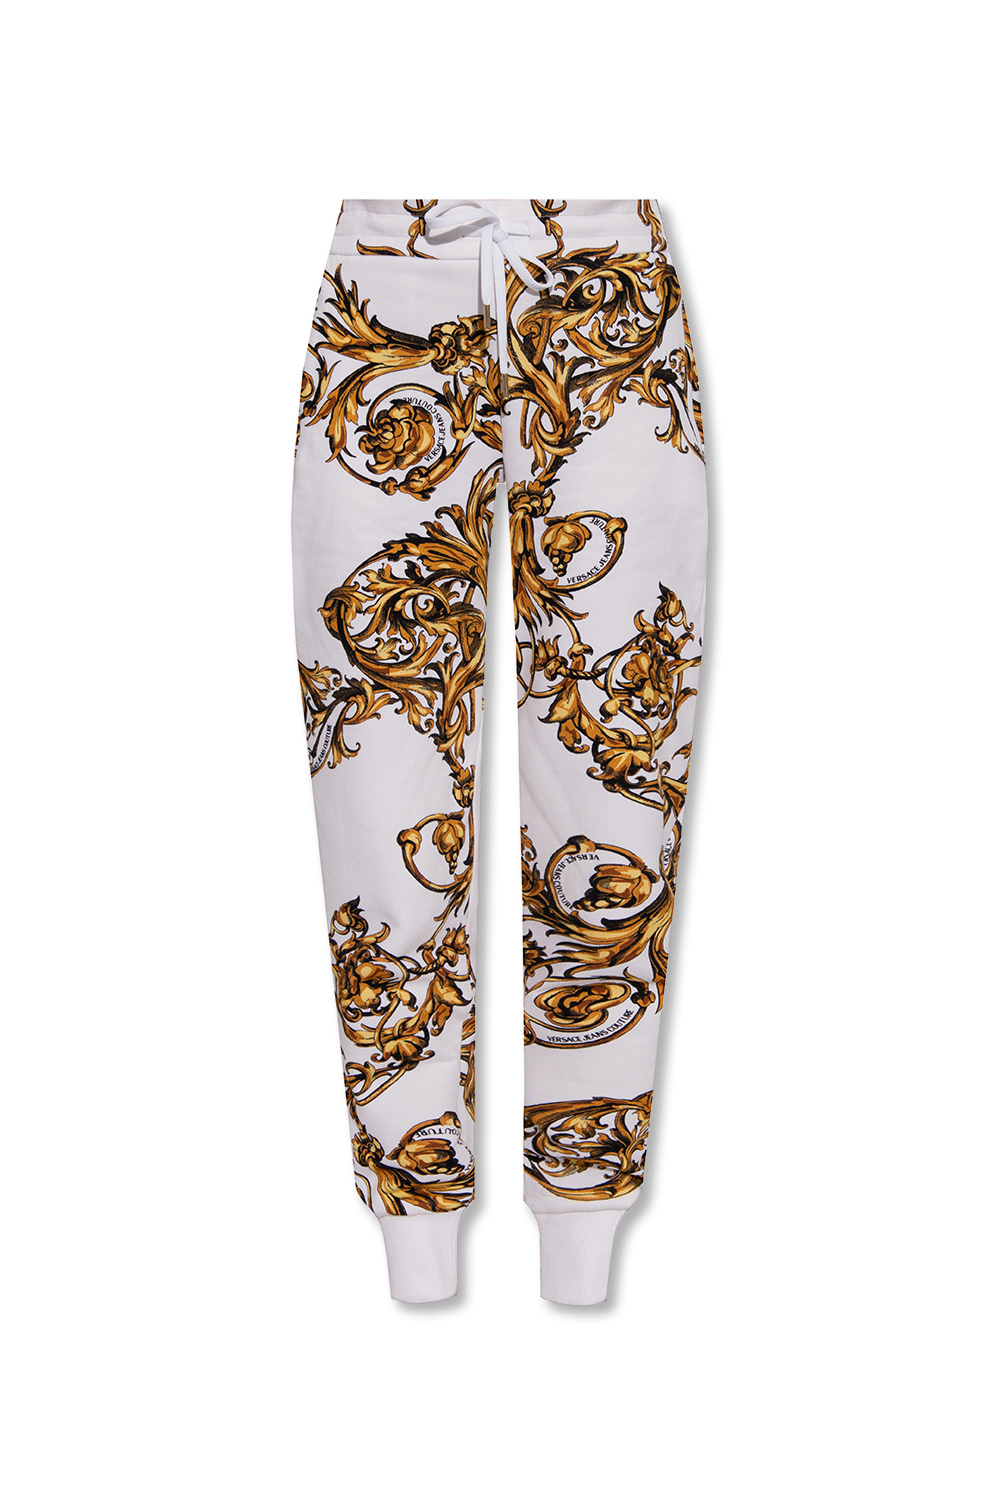 Versace Jeans Couture Barocco-printed sweatpants | Women's Clothing ...